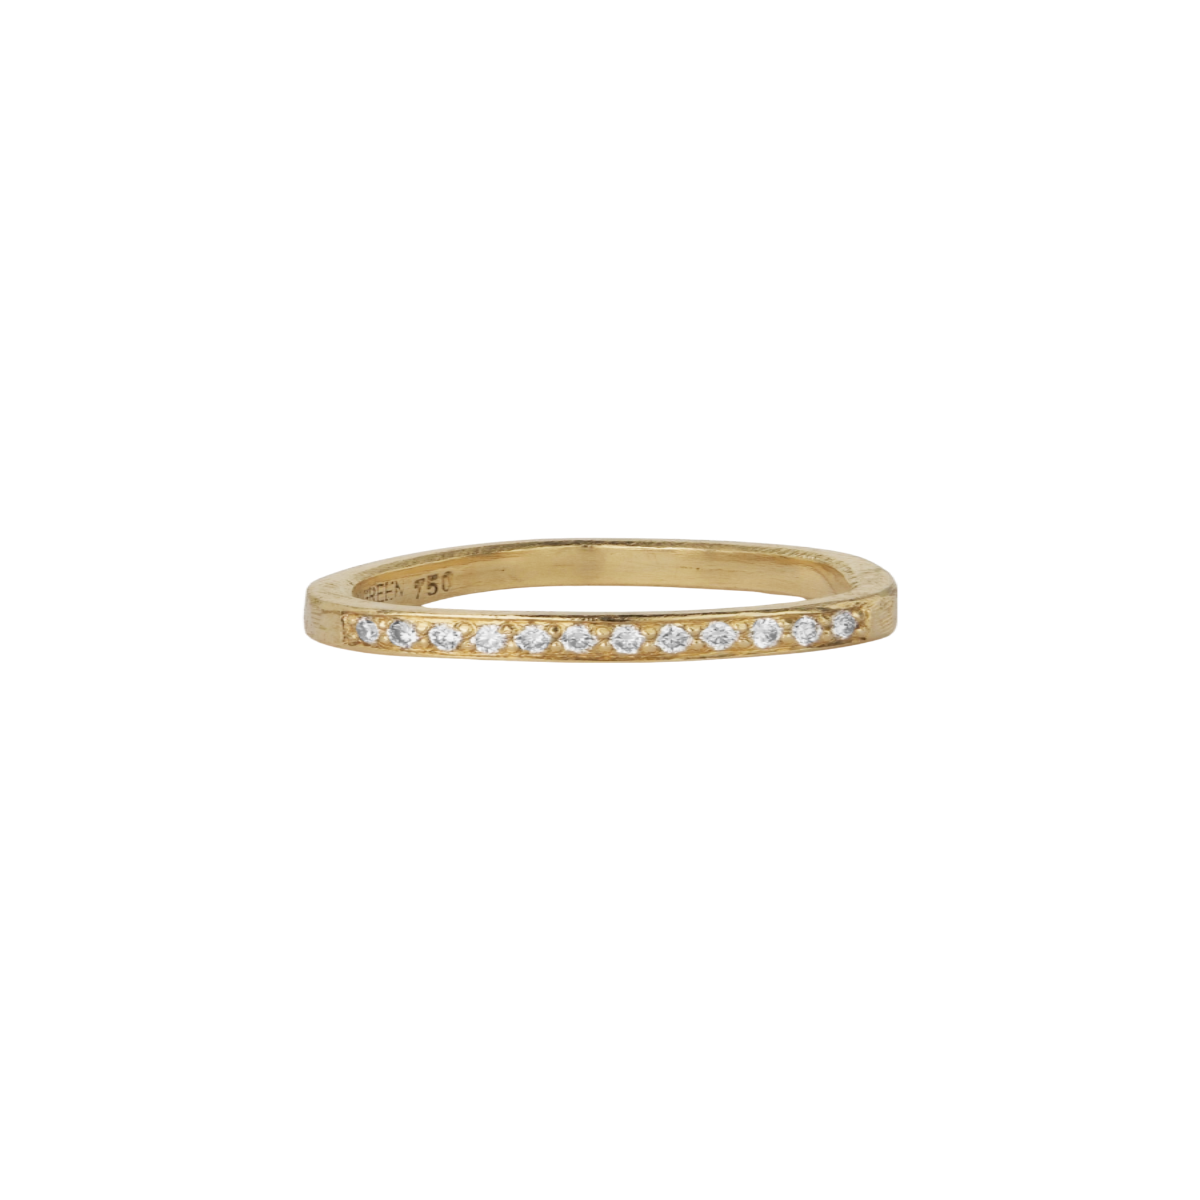 Eternity ring in 18kt. gold, with 12 small white diamonds